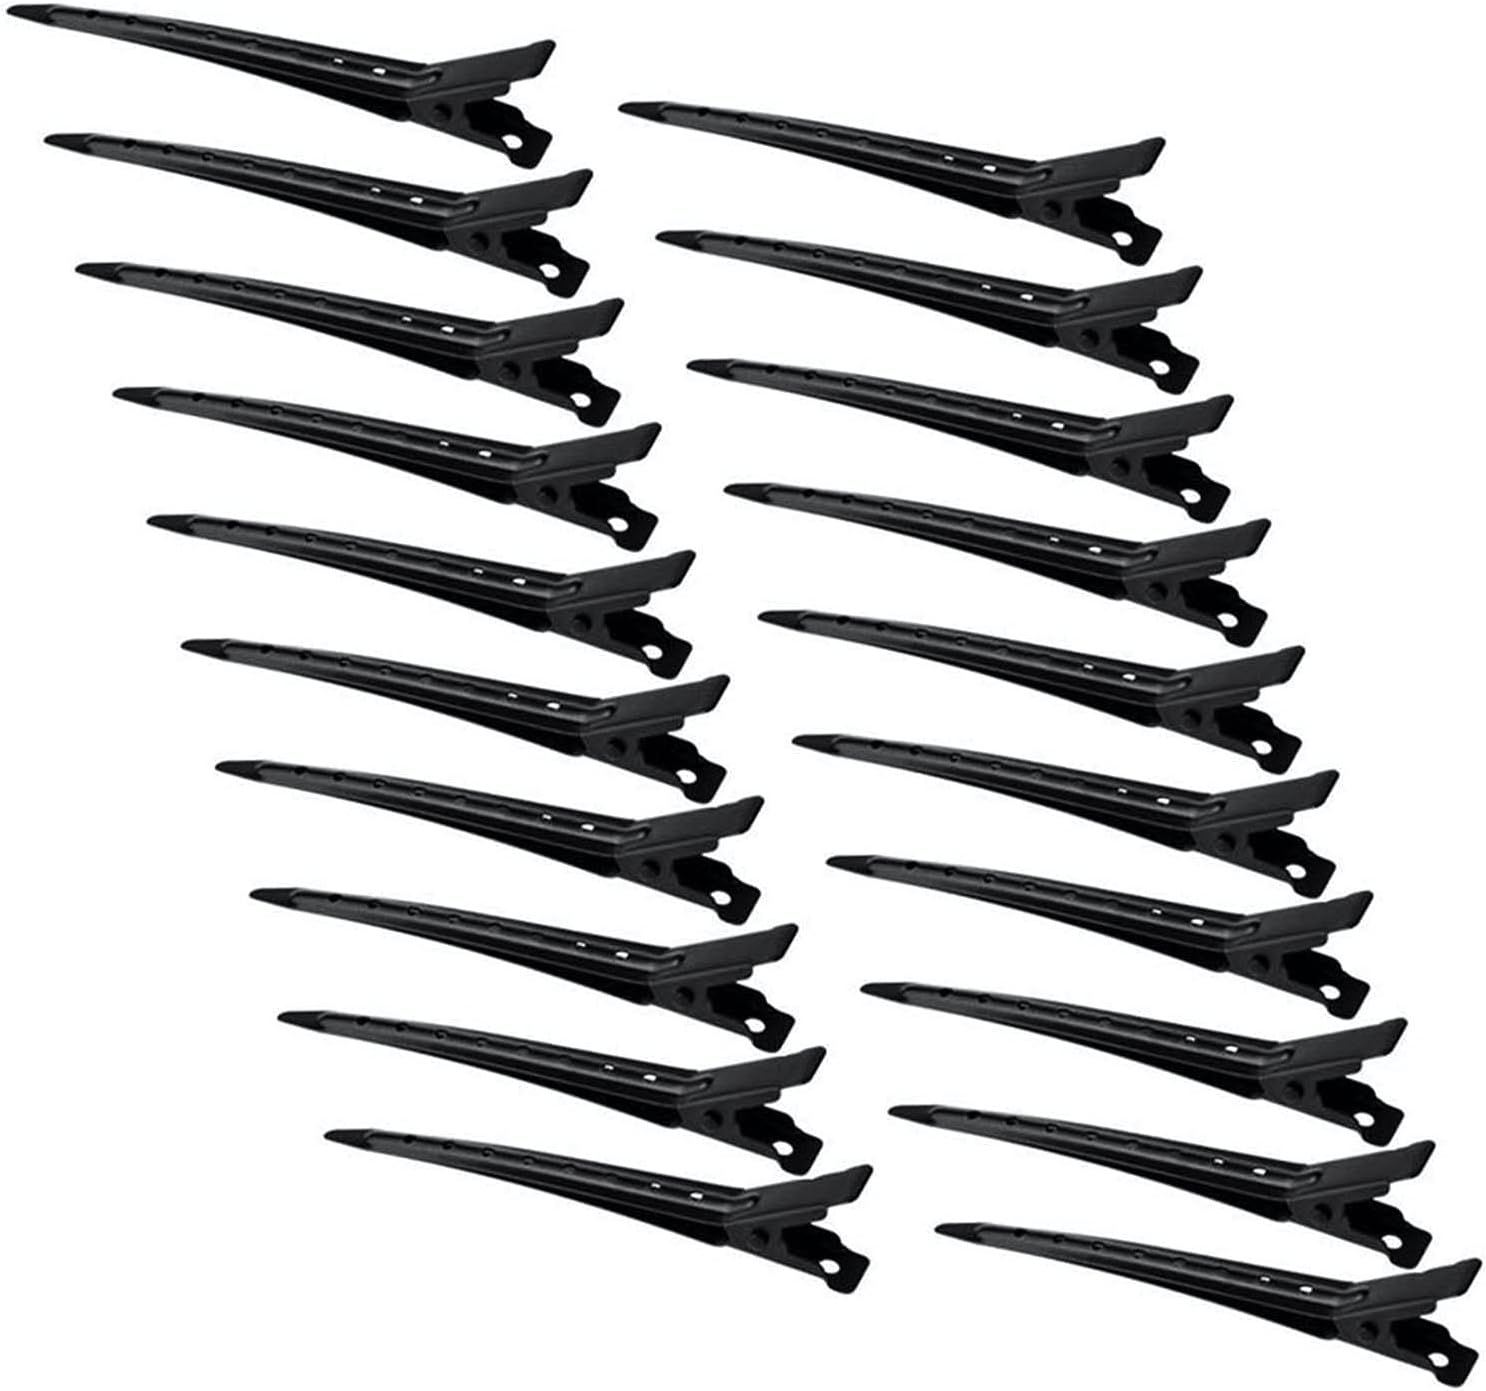 Clips Alligator Clips 3.5 Inches 50 Pack Rustproof Metal Styling Clips Pins - (Black) | Amazon (US)